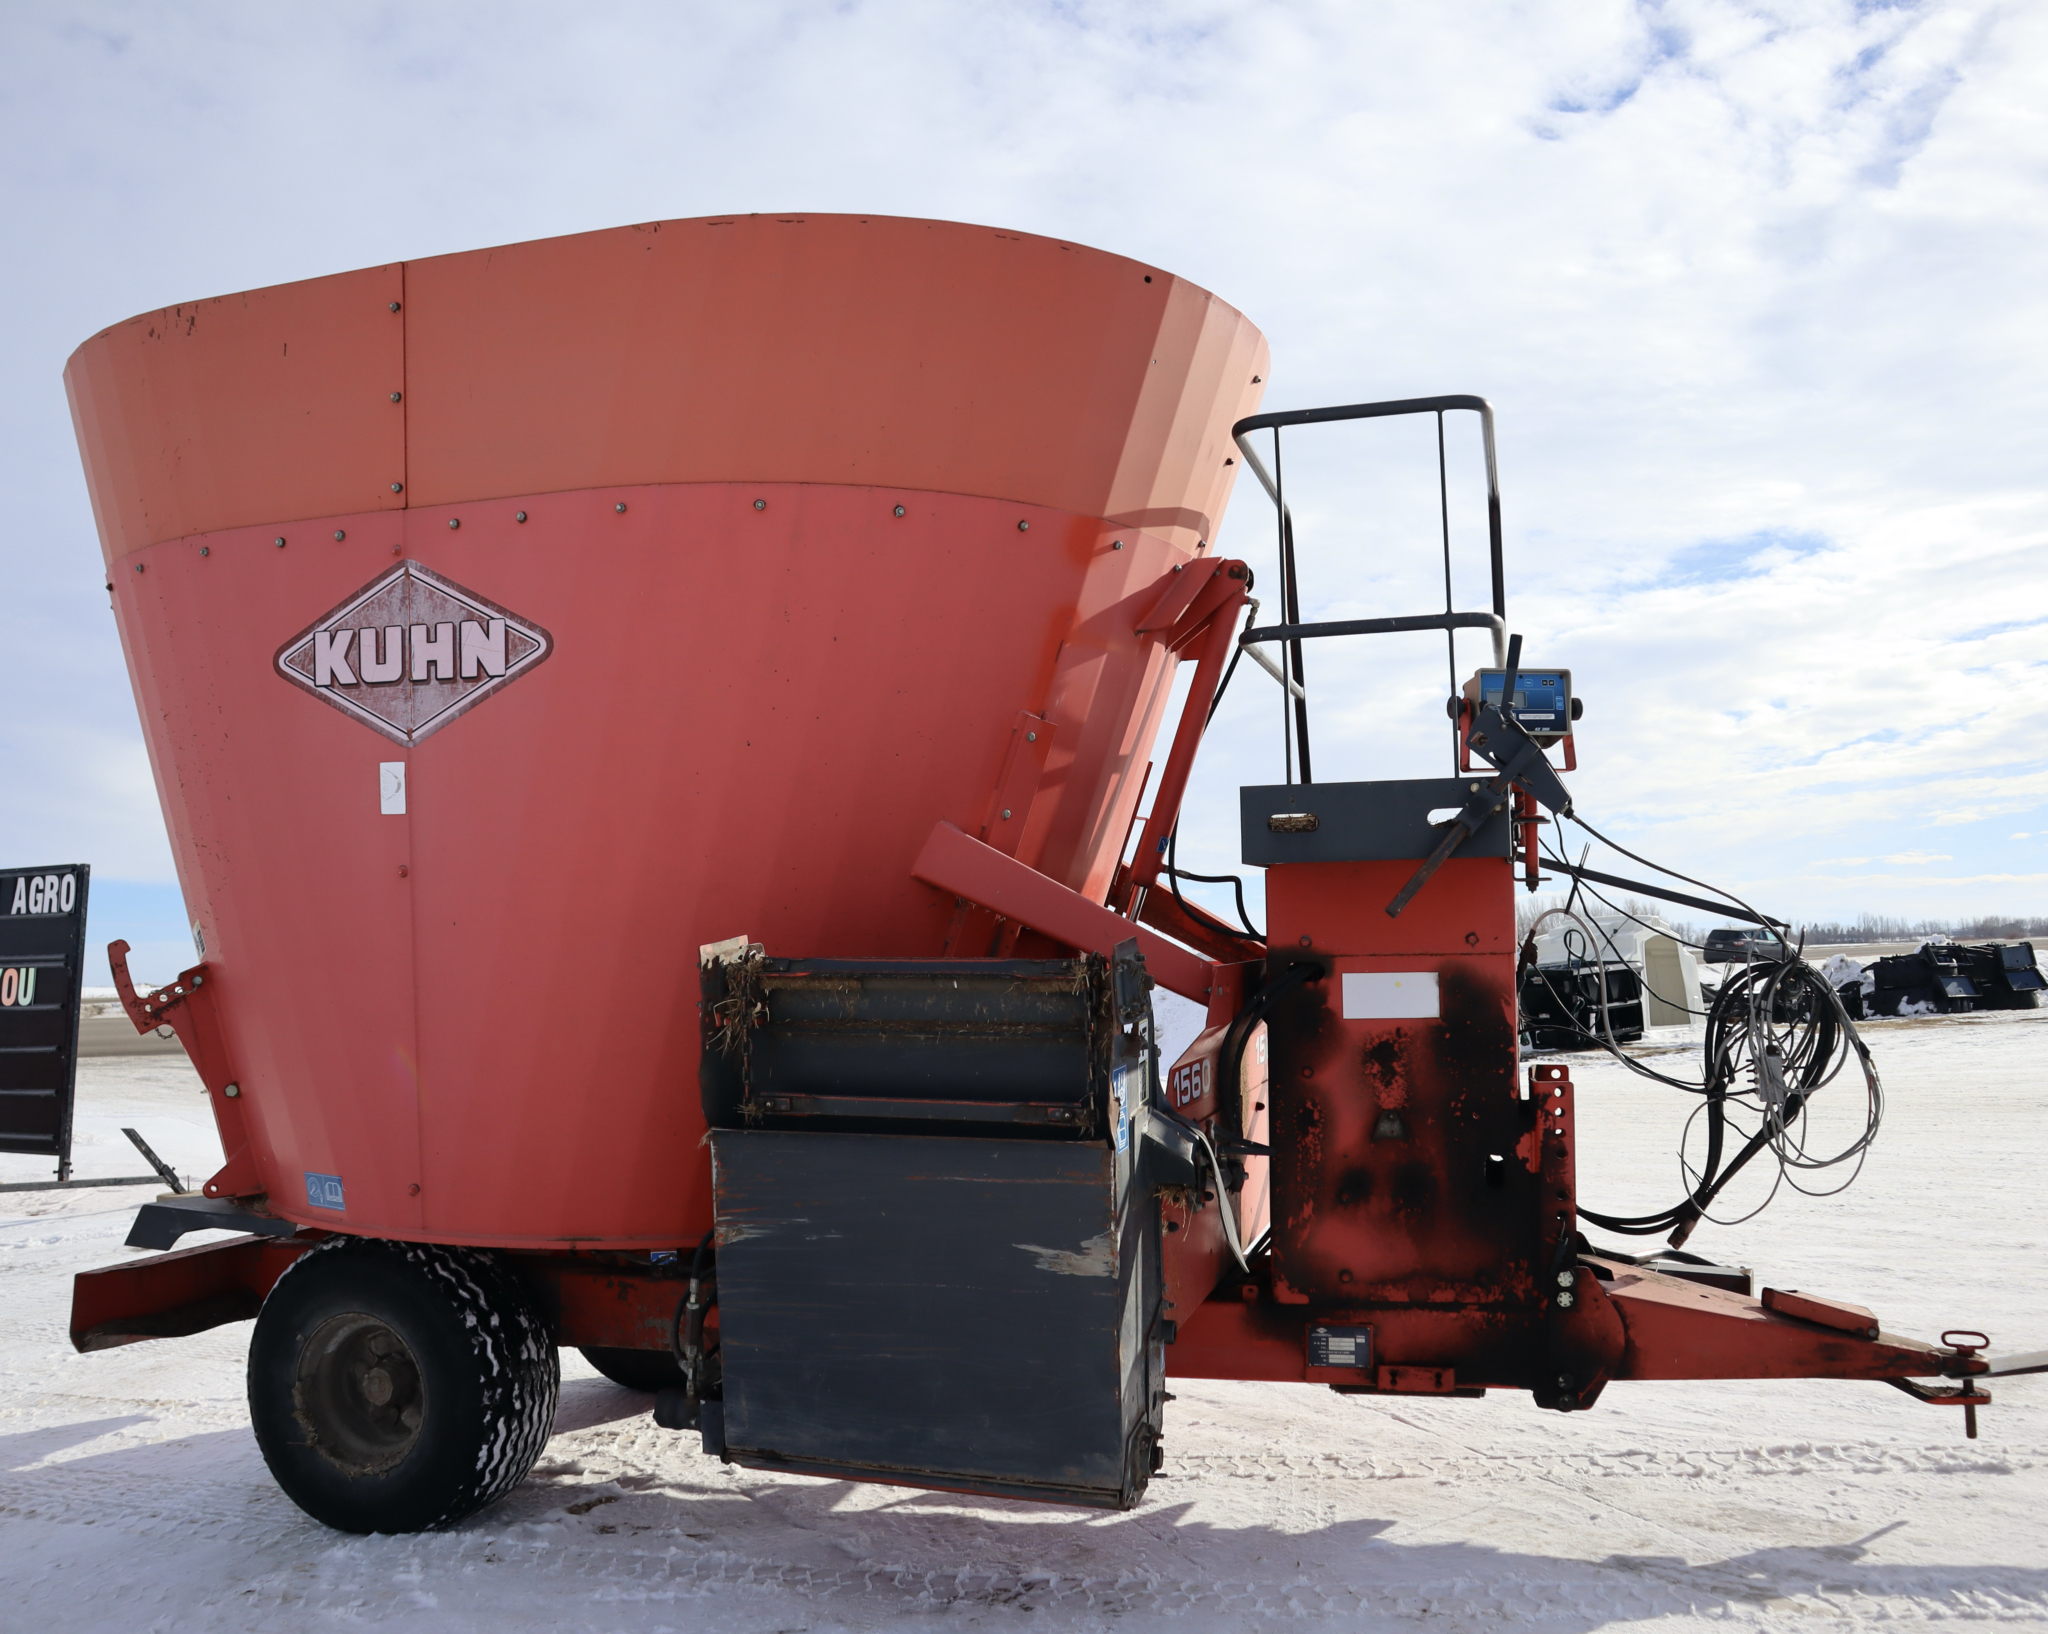 Kuhn feed mix wagon Consignment Equipment